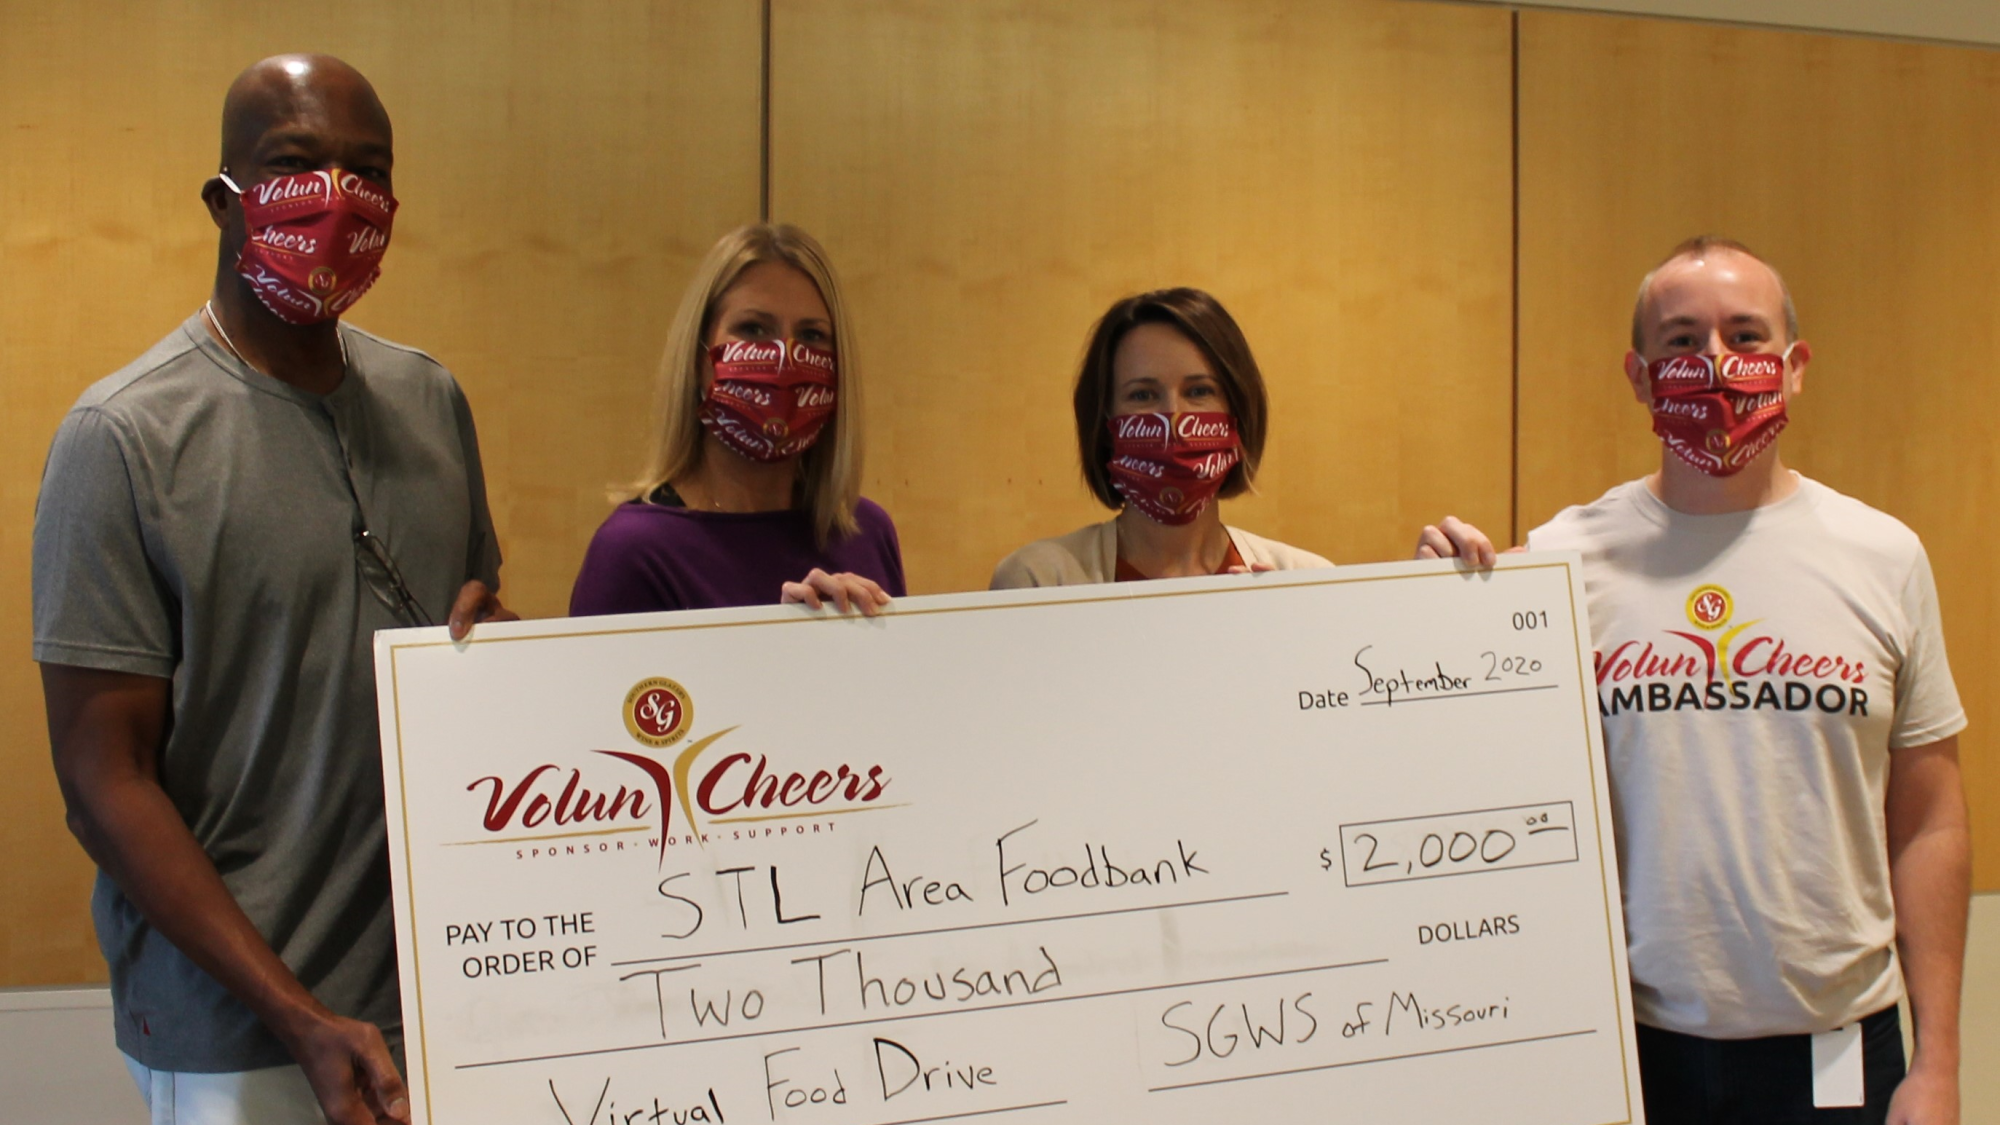 Voluncheers members presenting large check to virtual food drive